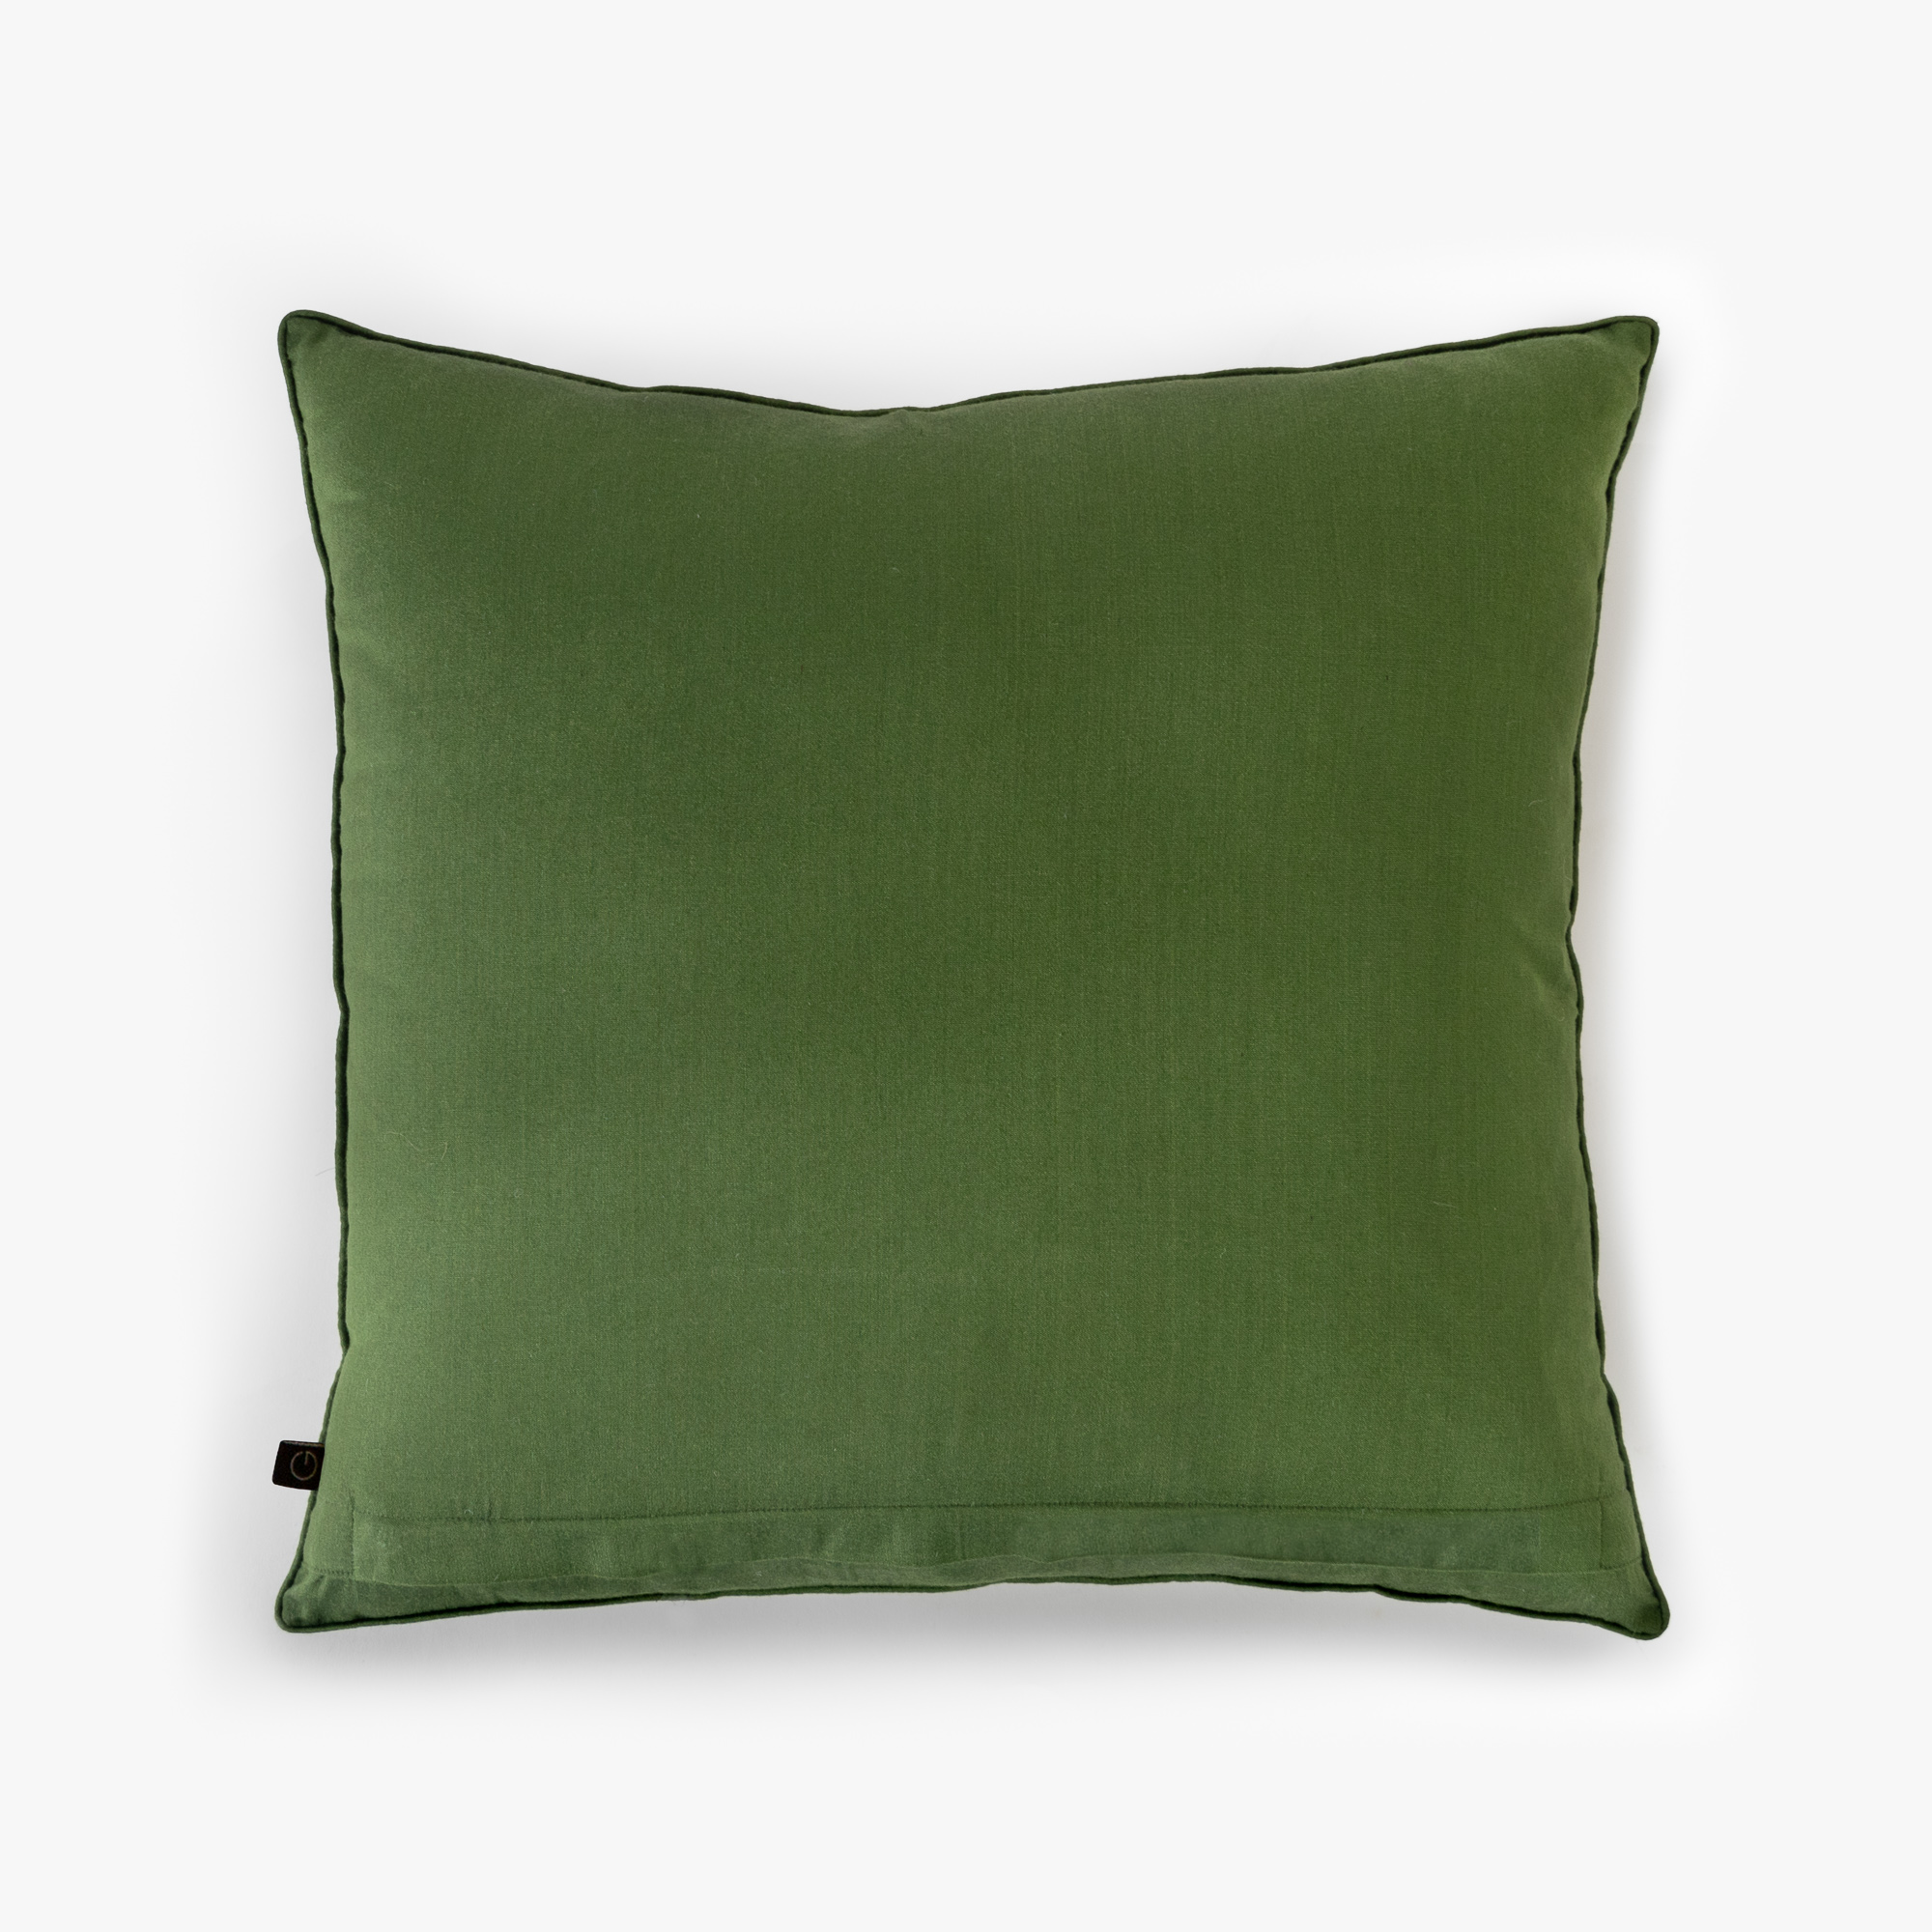 NESTLING SPARROWS CUSHION COVER